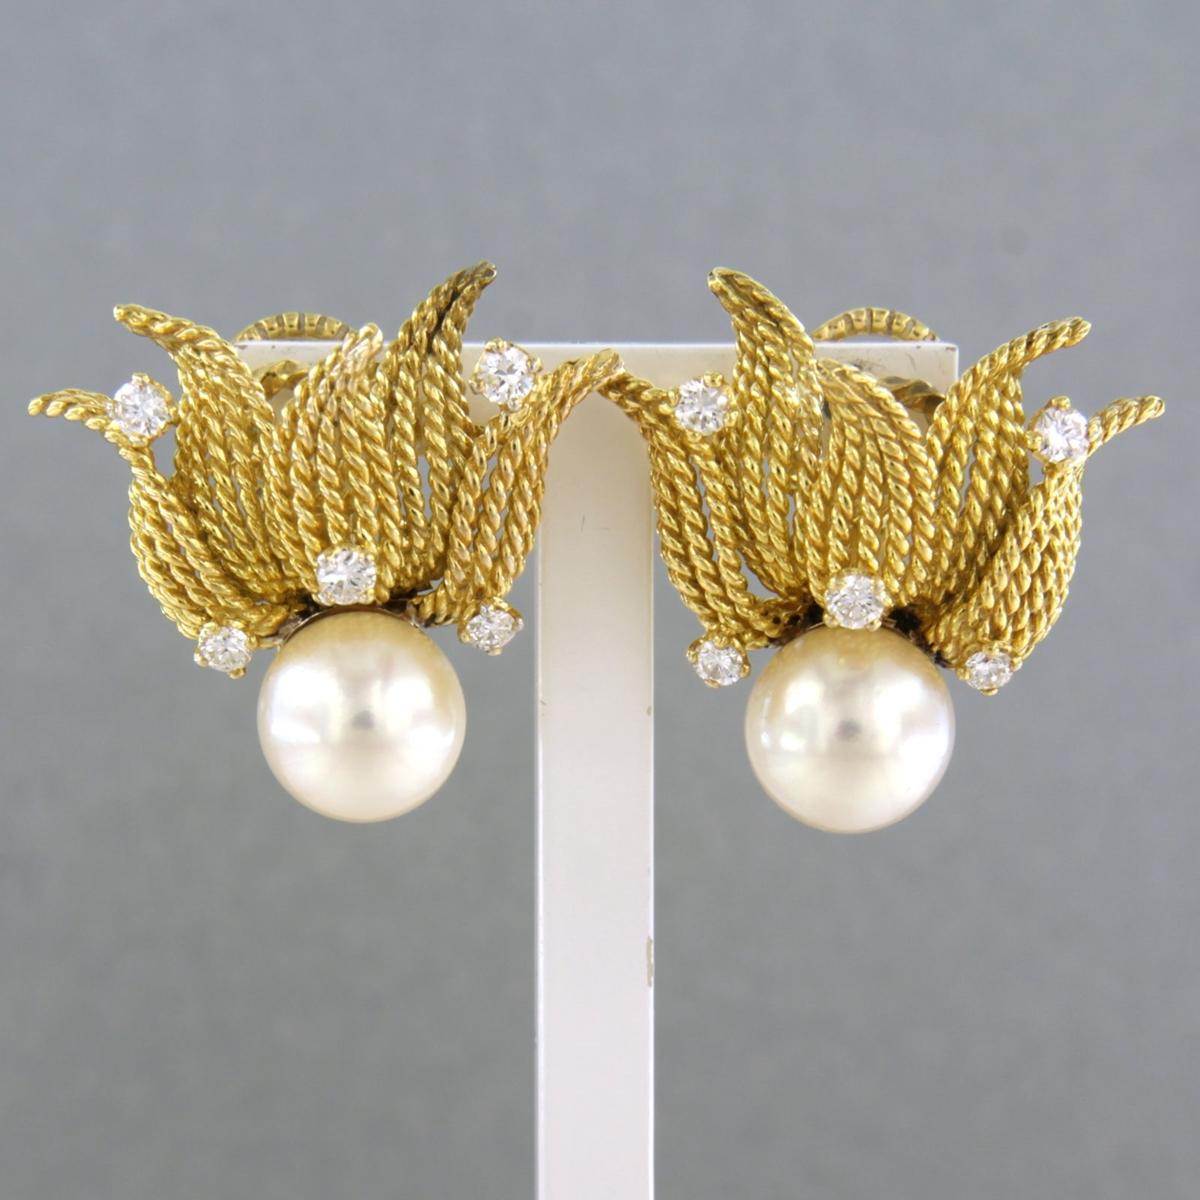 18k yellow gold ear clips set with pearl and brilliant cut diamonds. 0.40ct - F/G - VS/SI

detailed description:

size of the ear clips is 2.2 cm by 2.3 cm wide

Total weight 14.0 grams

set with

- 2 x 8.7 mm freshwater cultured pearl

colour